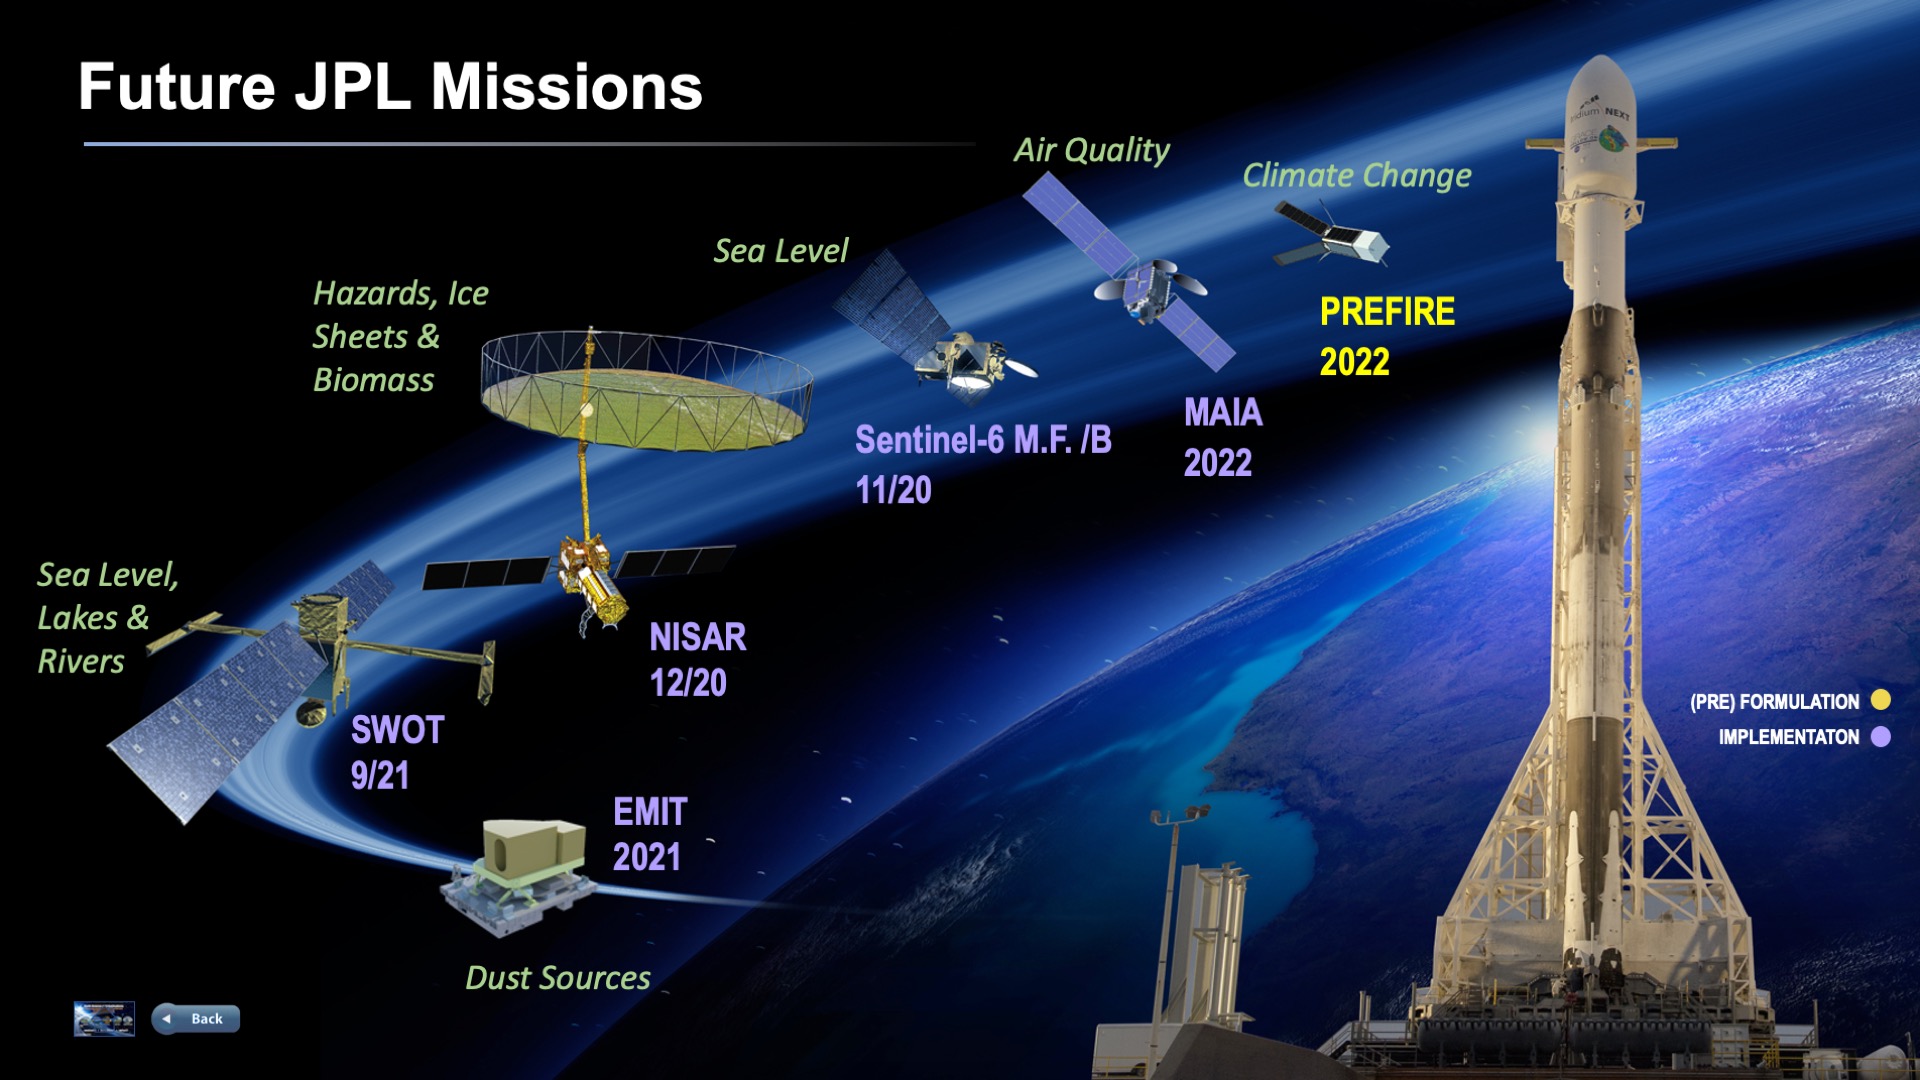 presentation slide showing a graphic of future JPL missions